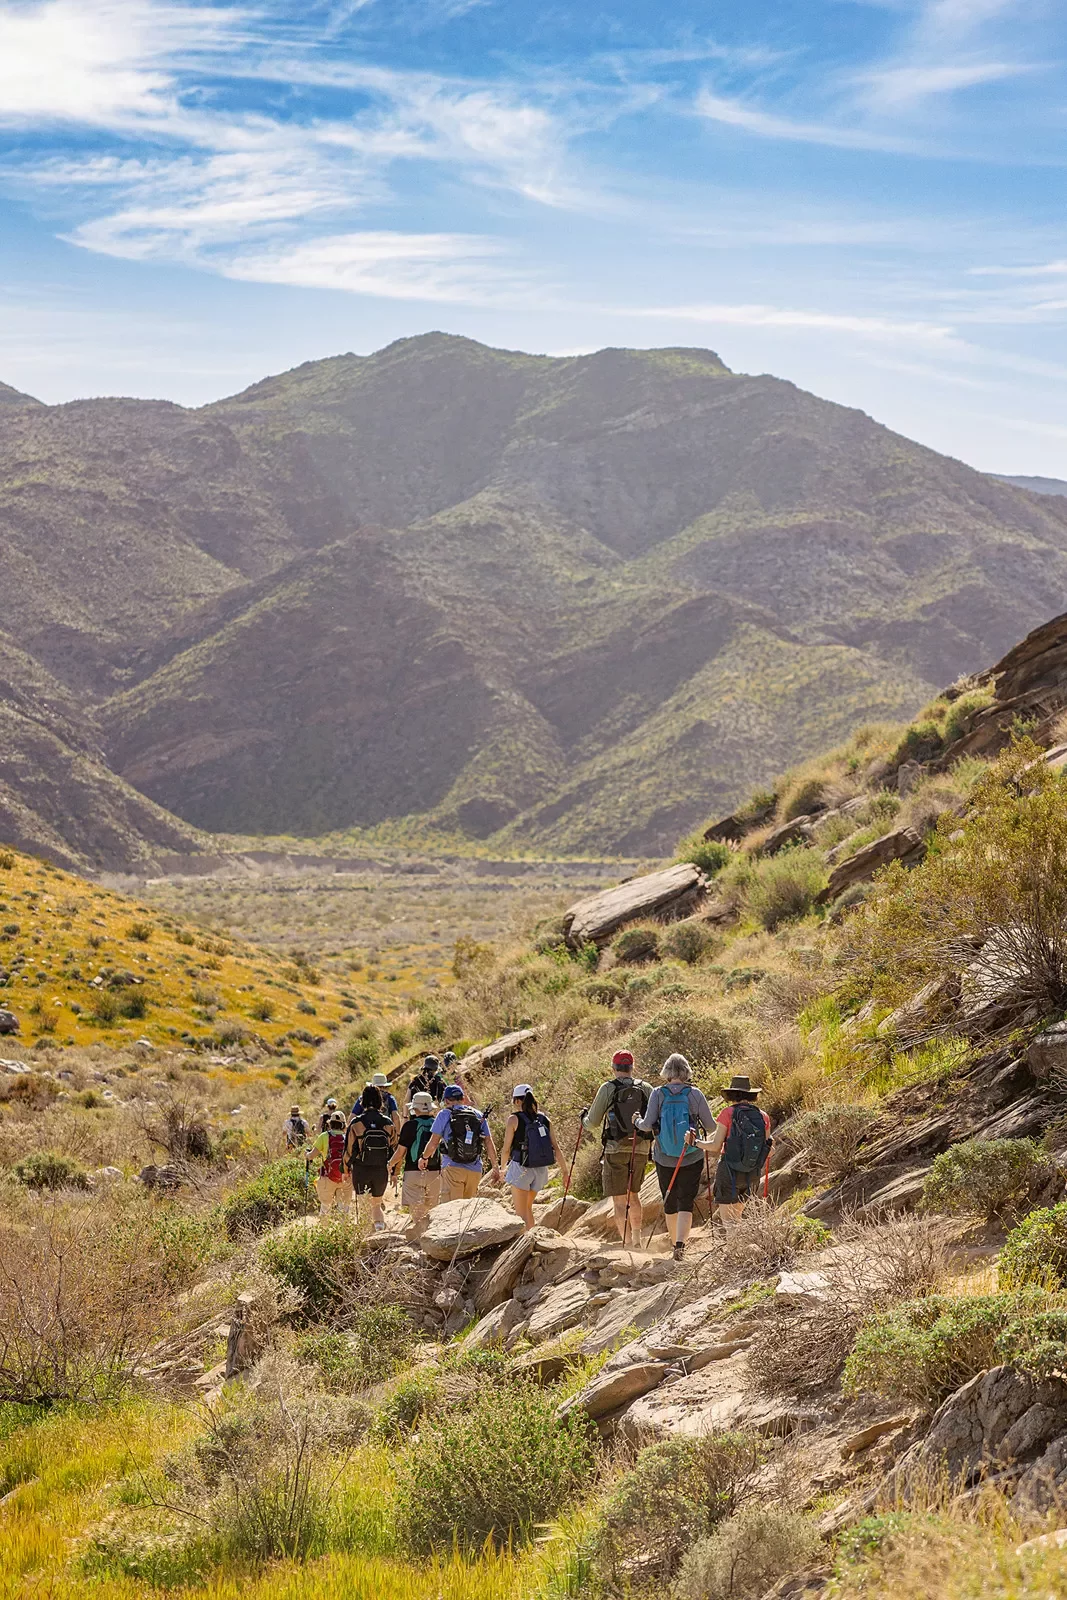 Guests hiking in desert valley, blue sky and mountain in background.